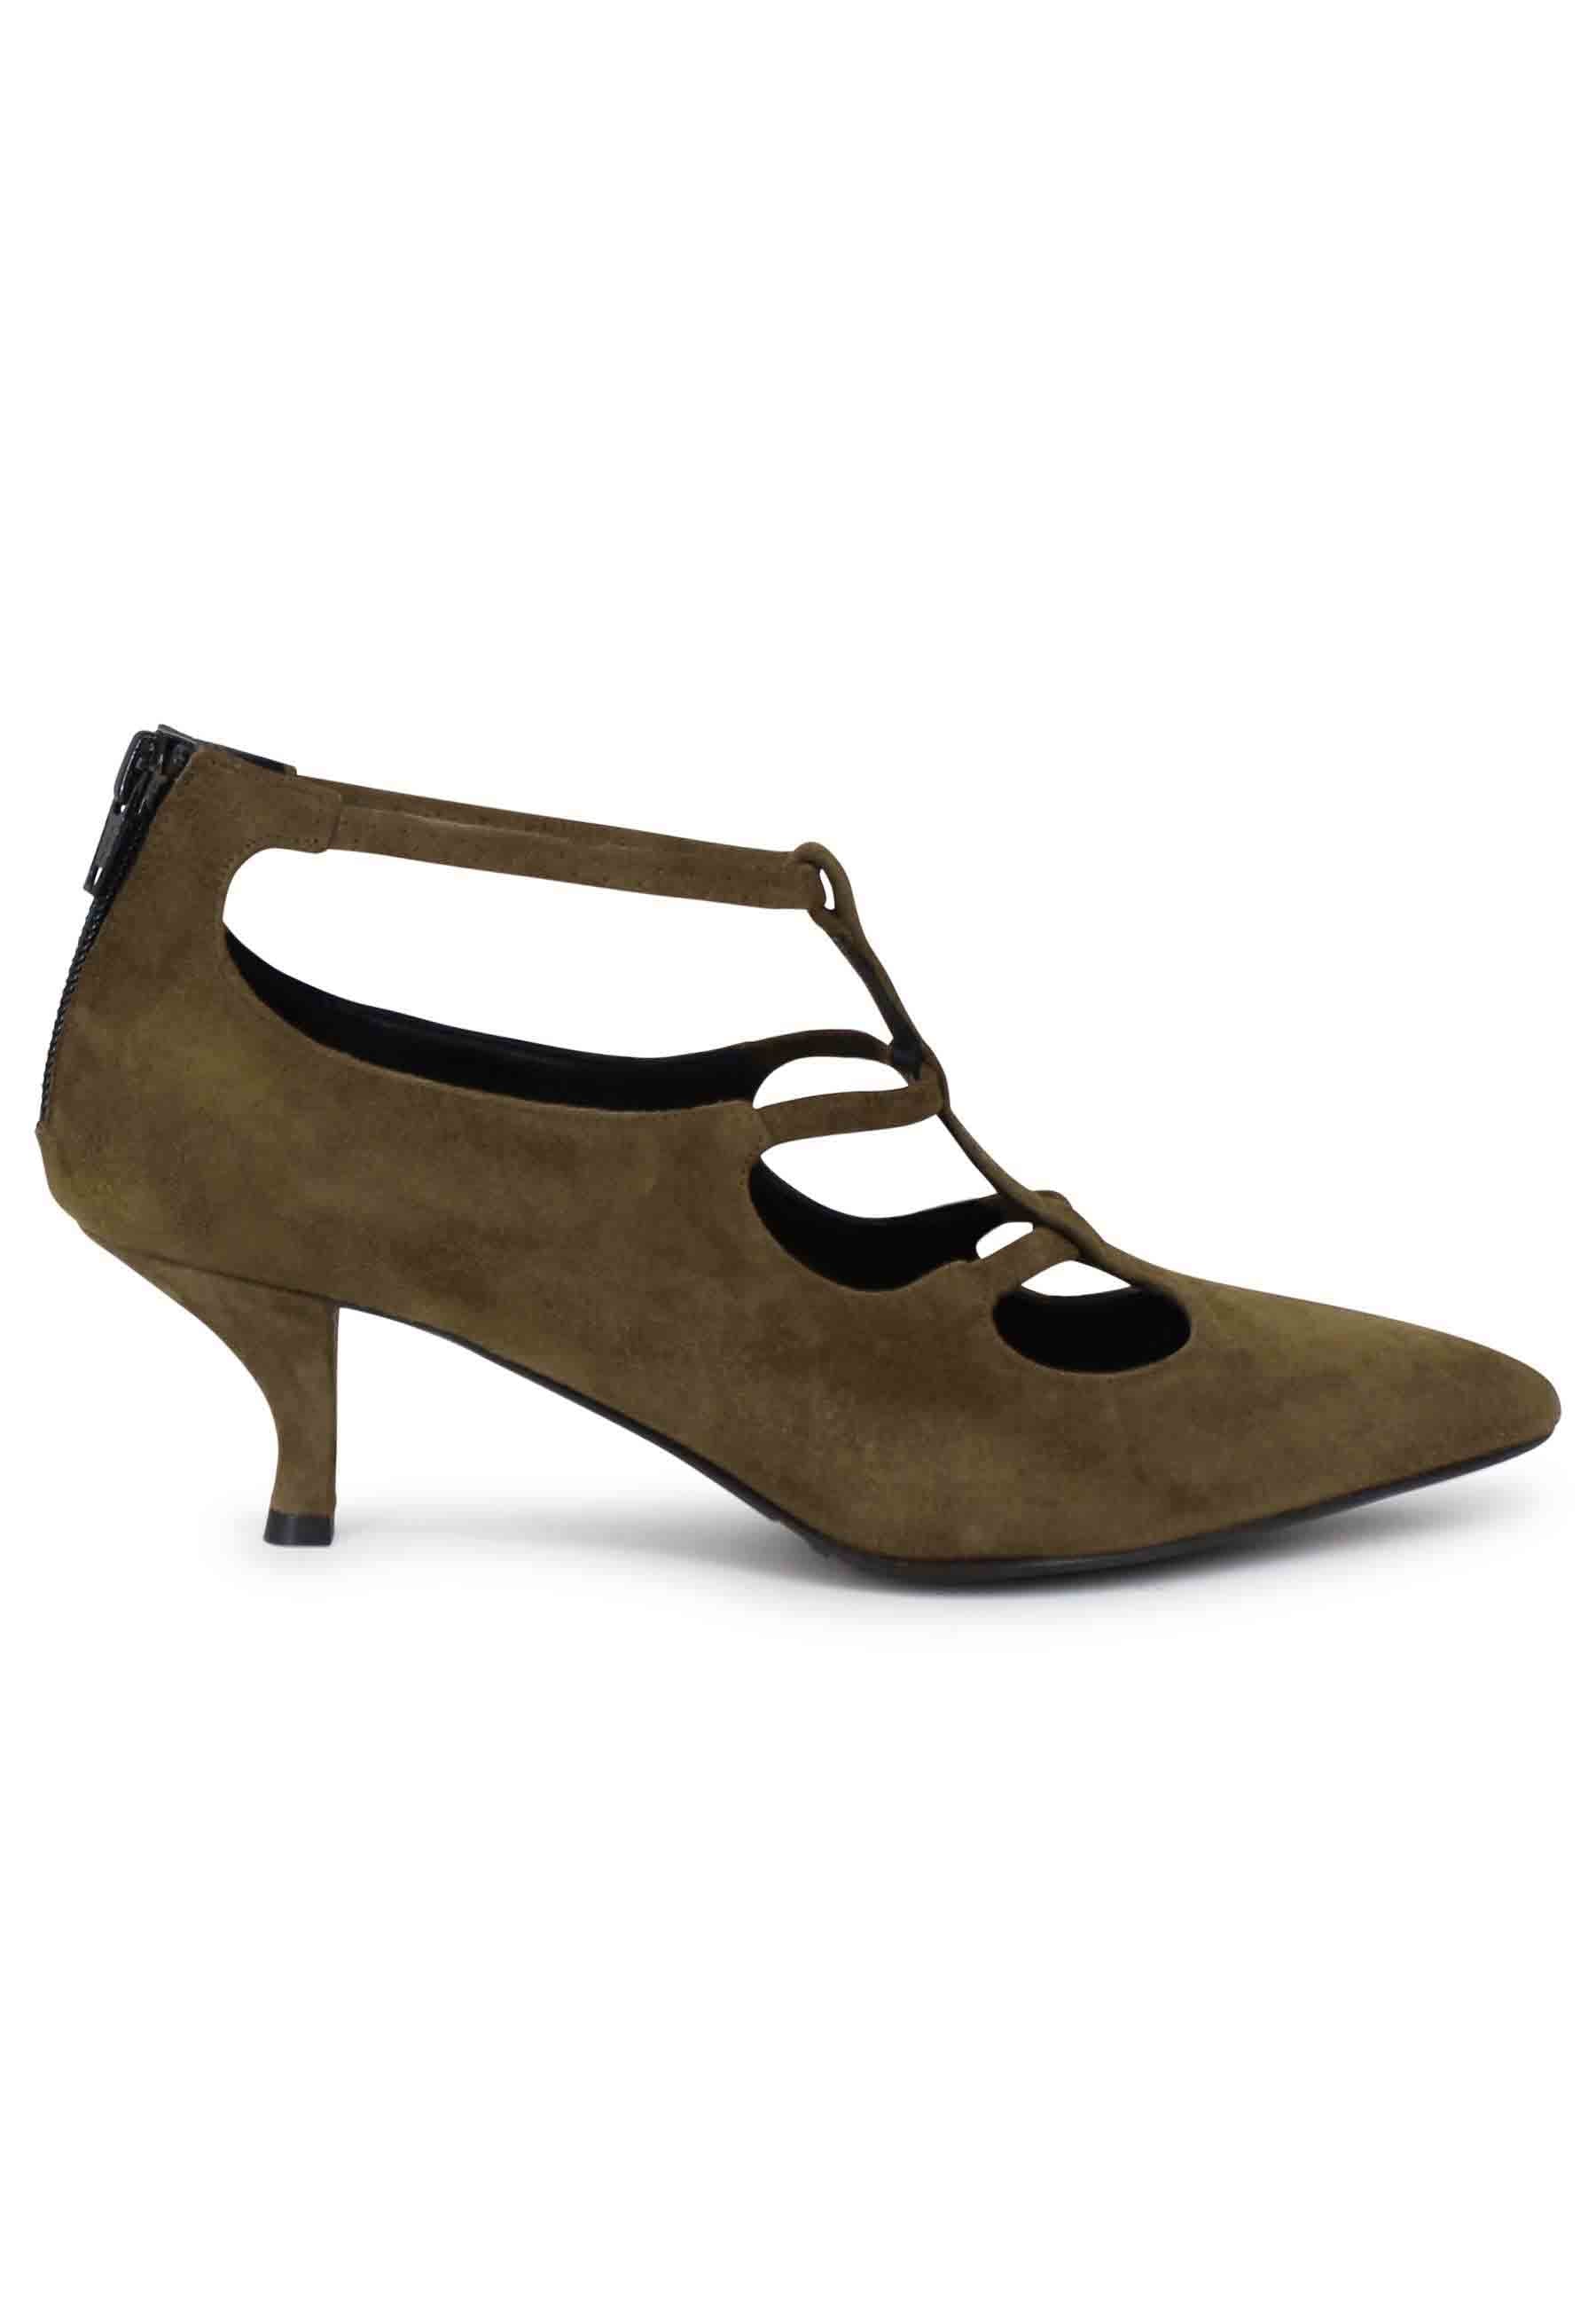 Women's green suede pumps with straps